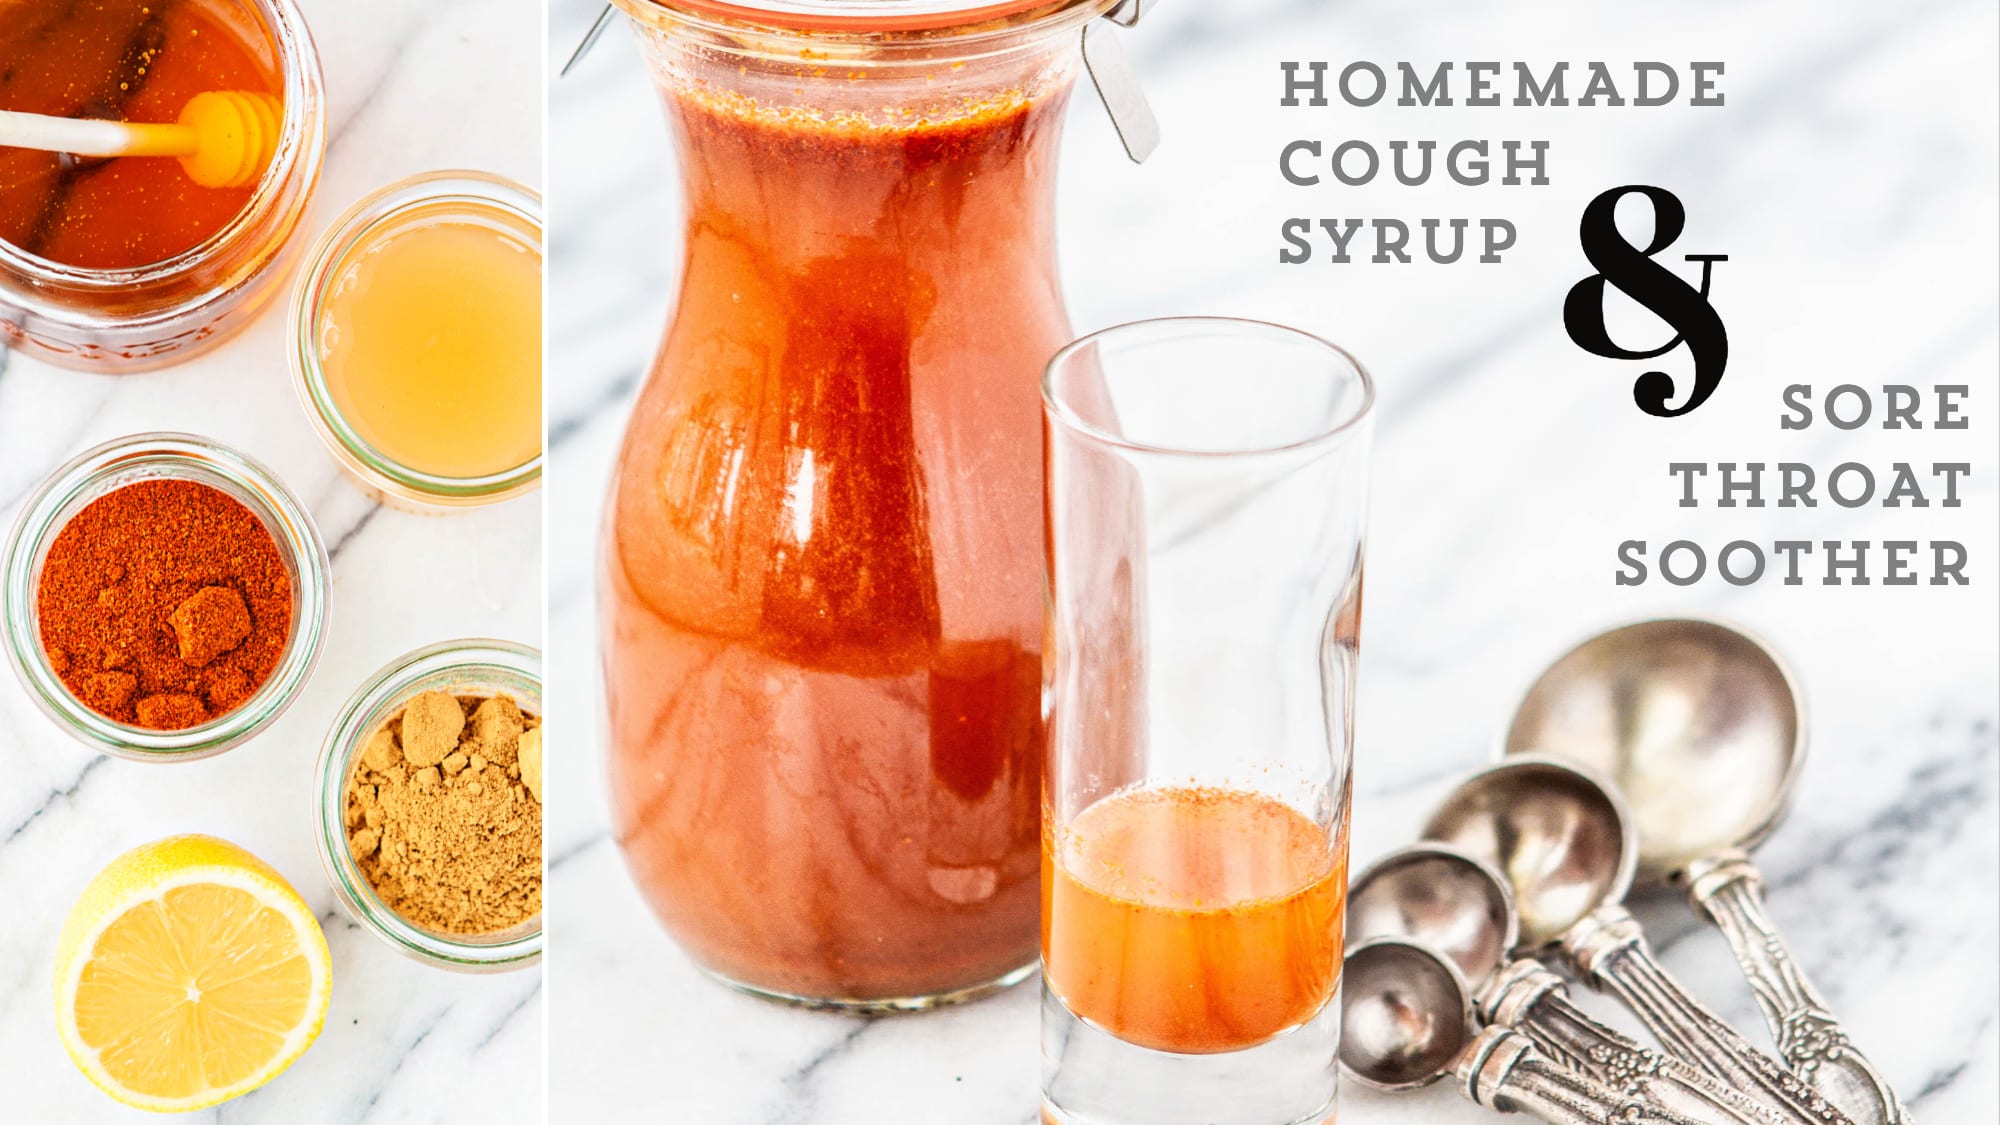 GREAT HOMEMADE SYRUP TO FINISH A DRY COUGH 